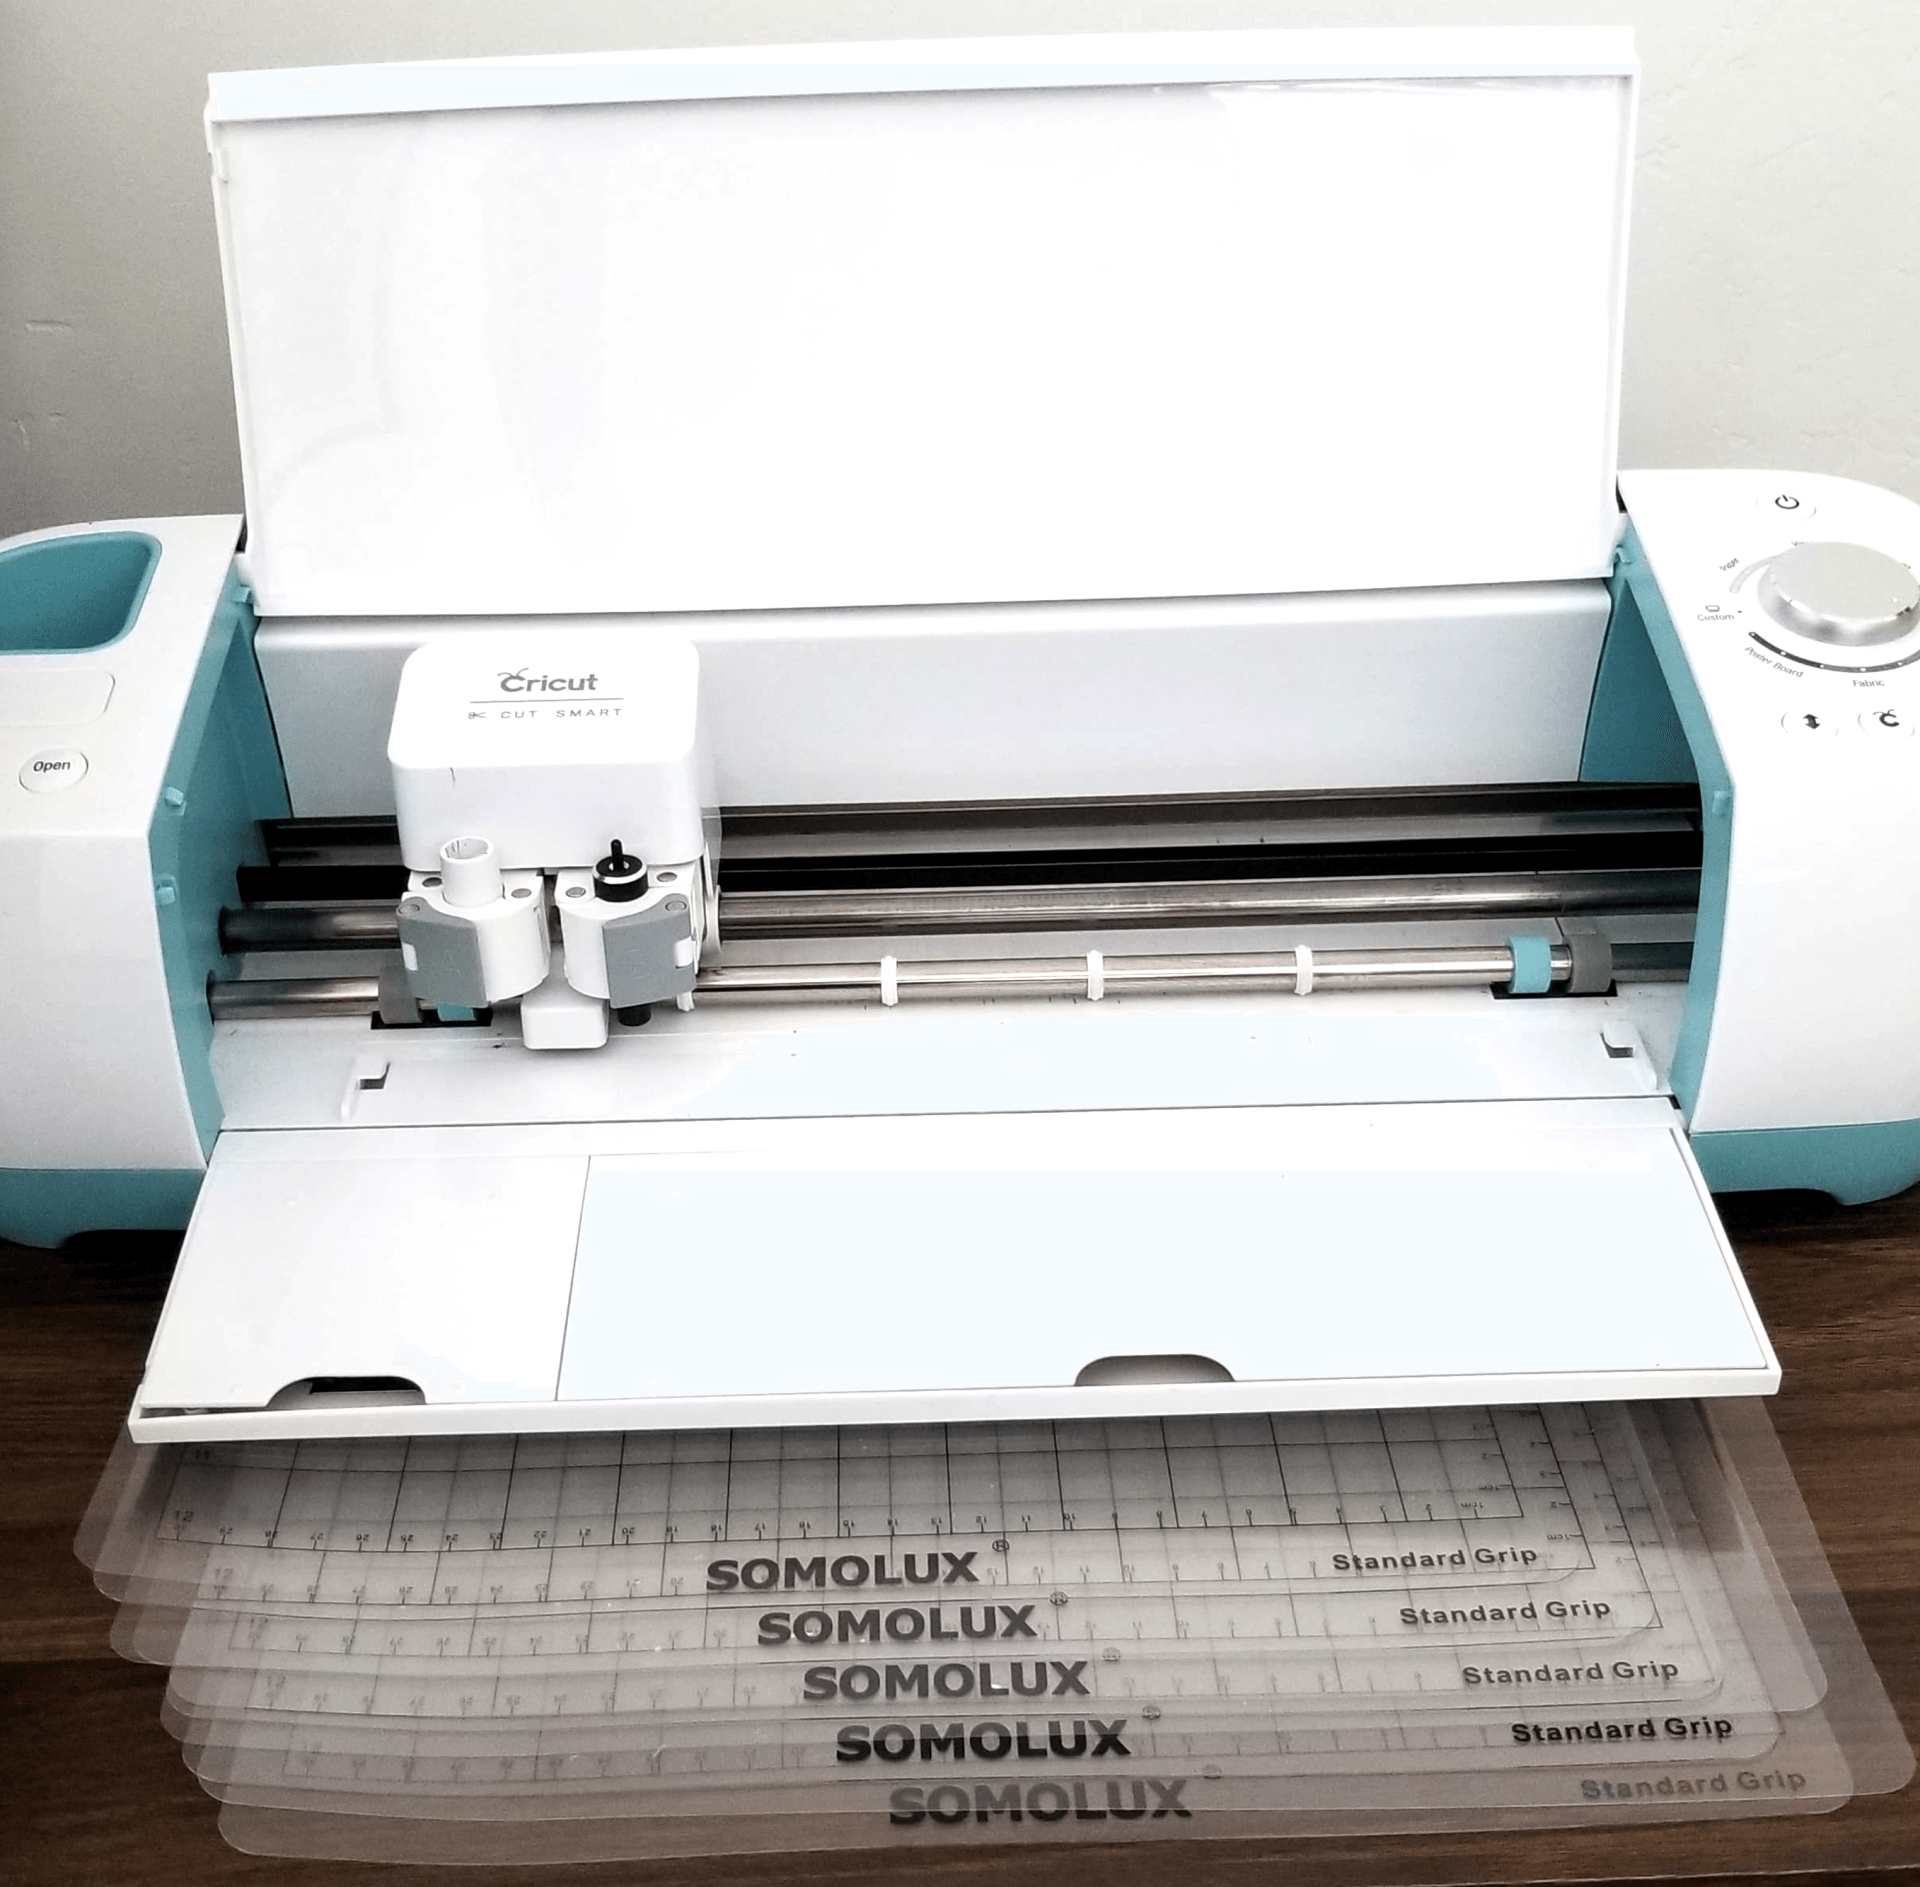 5 Must-Haves for New Cricut Crafters (Budget-Friendly Hacks)